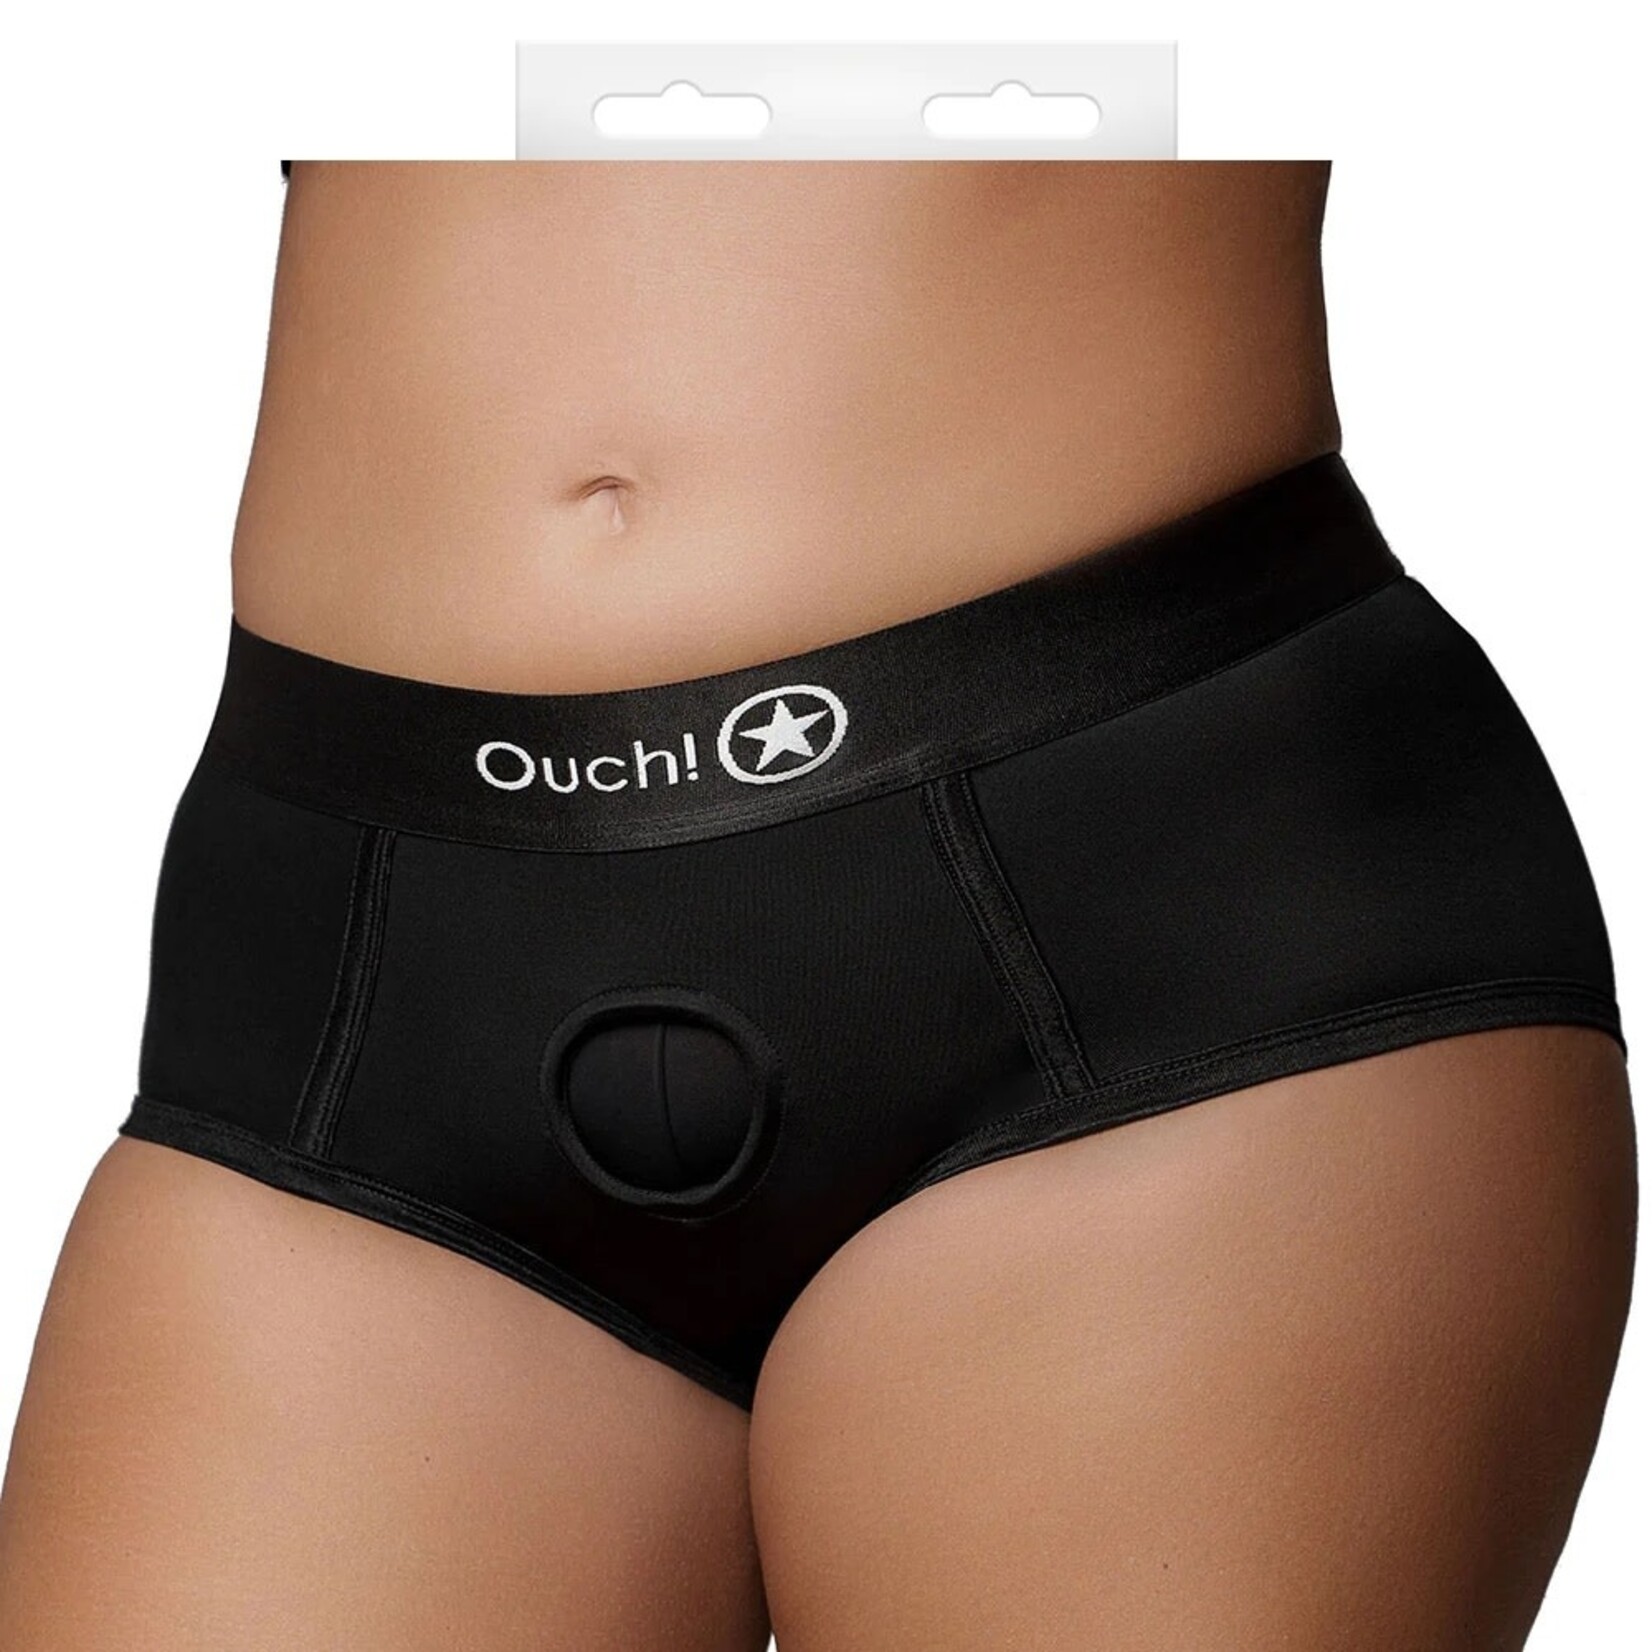 OUCH OUCH! BLACK VIBRATING STRAP-ON BRIEF XL/2X